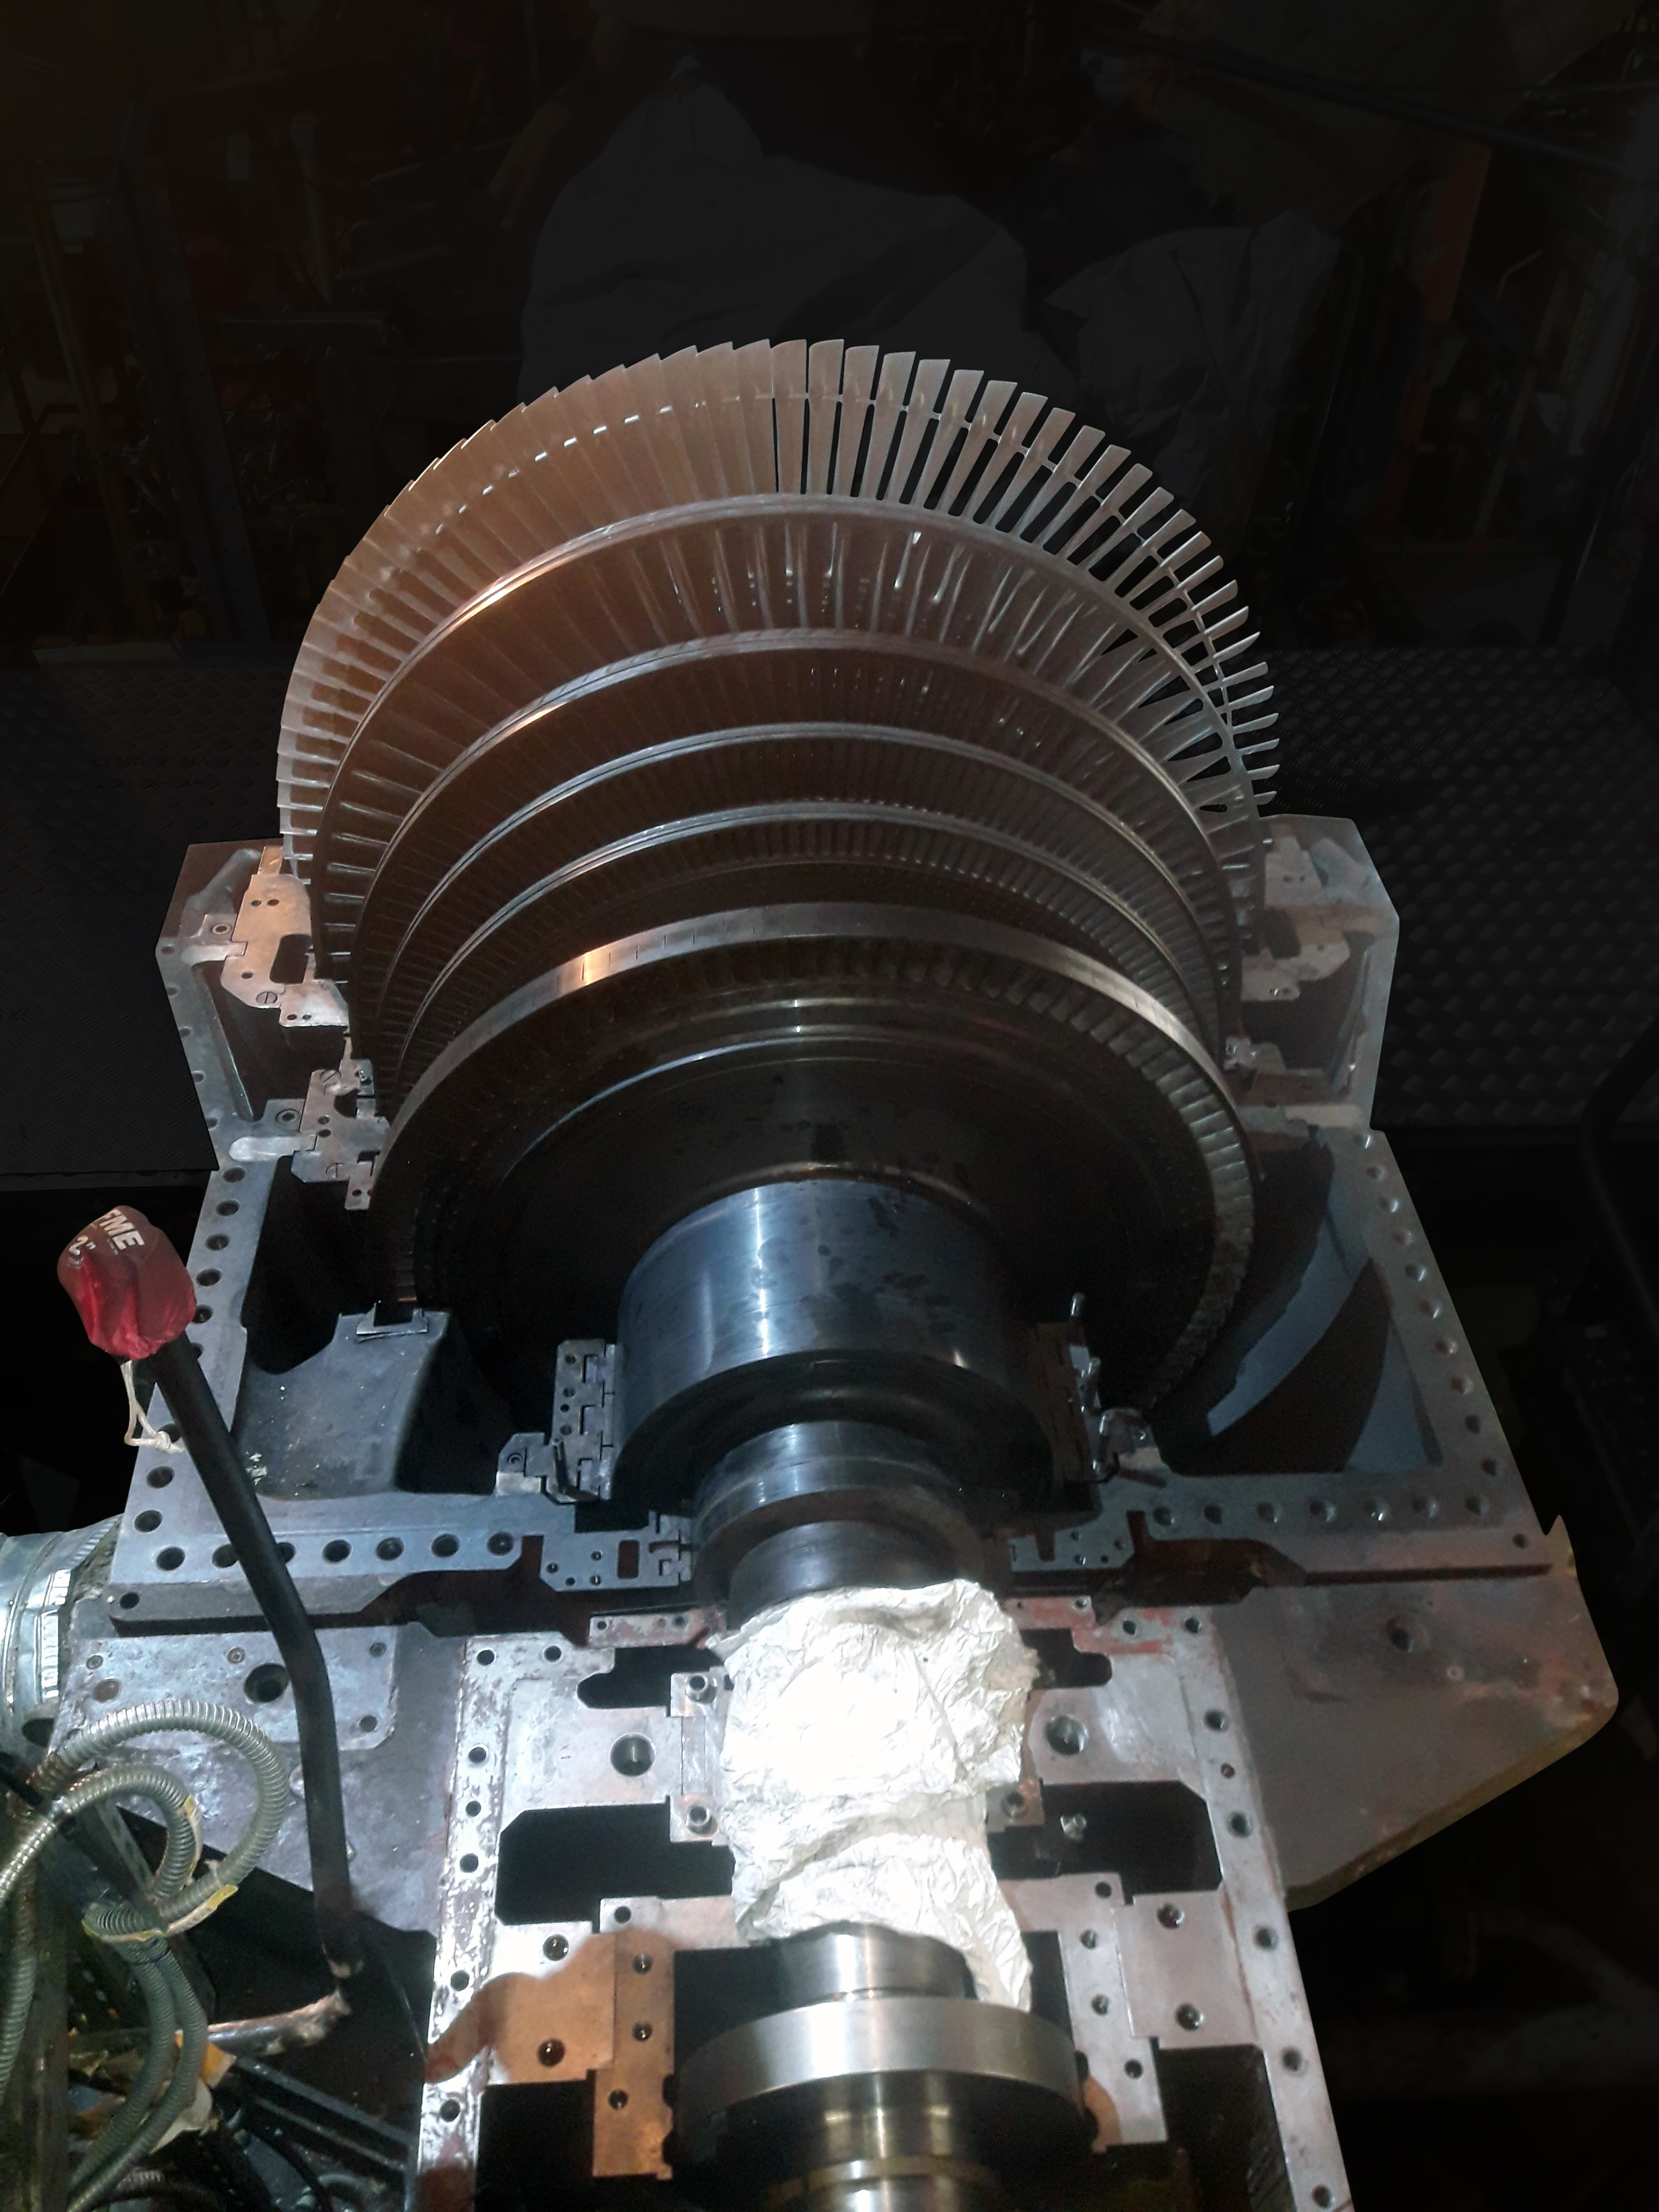 Sulzer was awarded the contract to refurbish the steam turbine, the gearbox and the pump it was driving, to be completed withing the six-week window